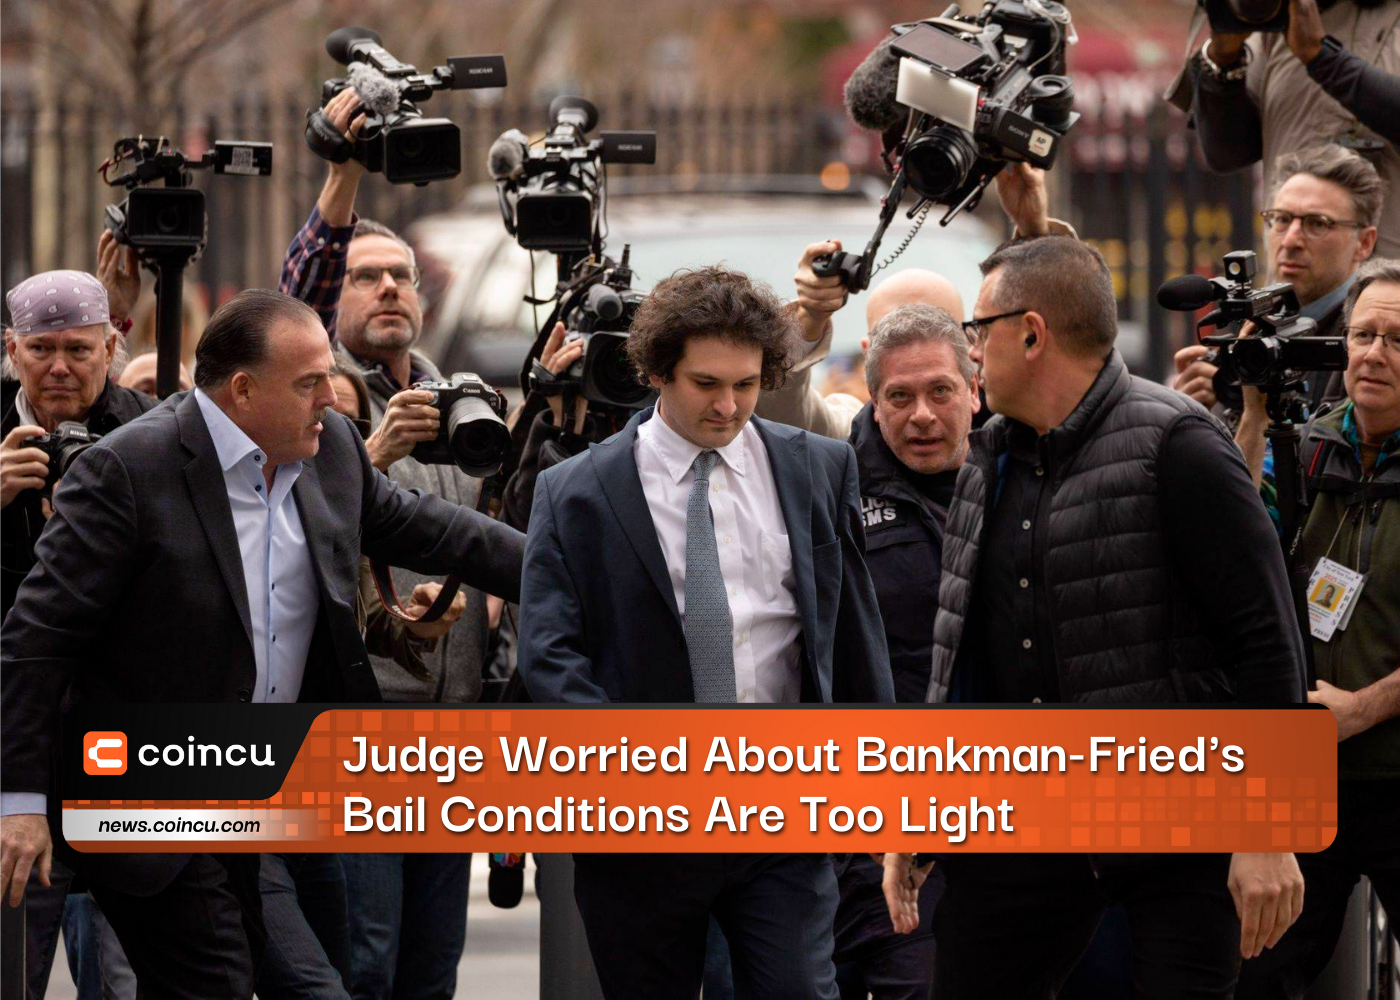 Judge Worried About Bankman-Fried's Bail Conditions Are Too Light